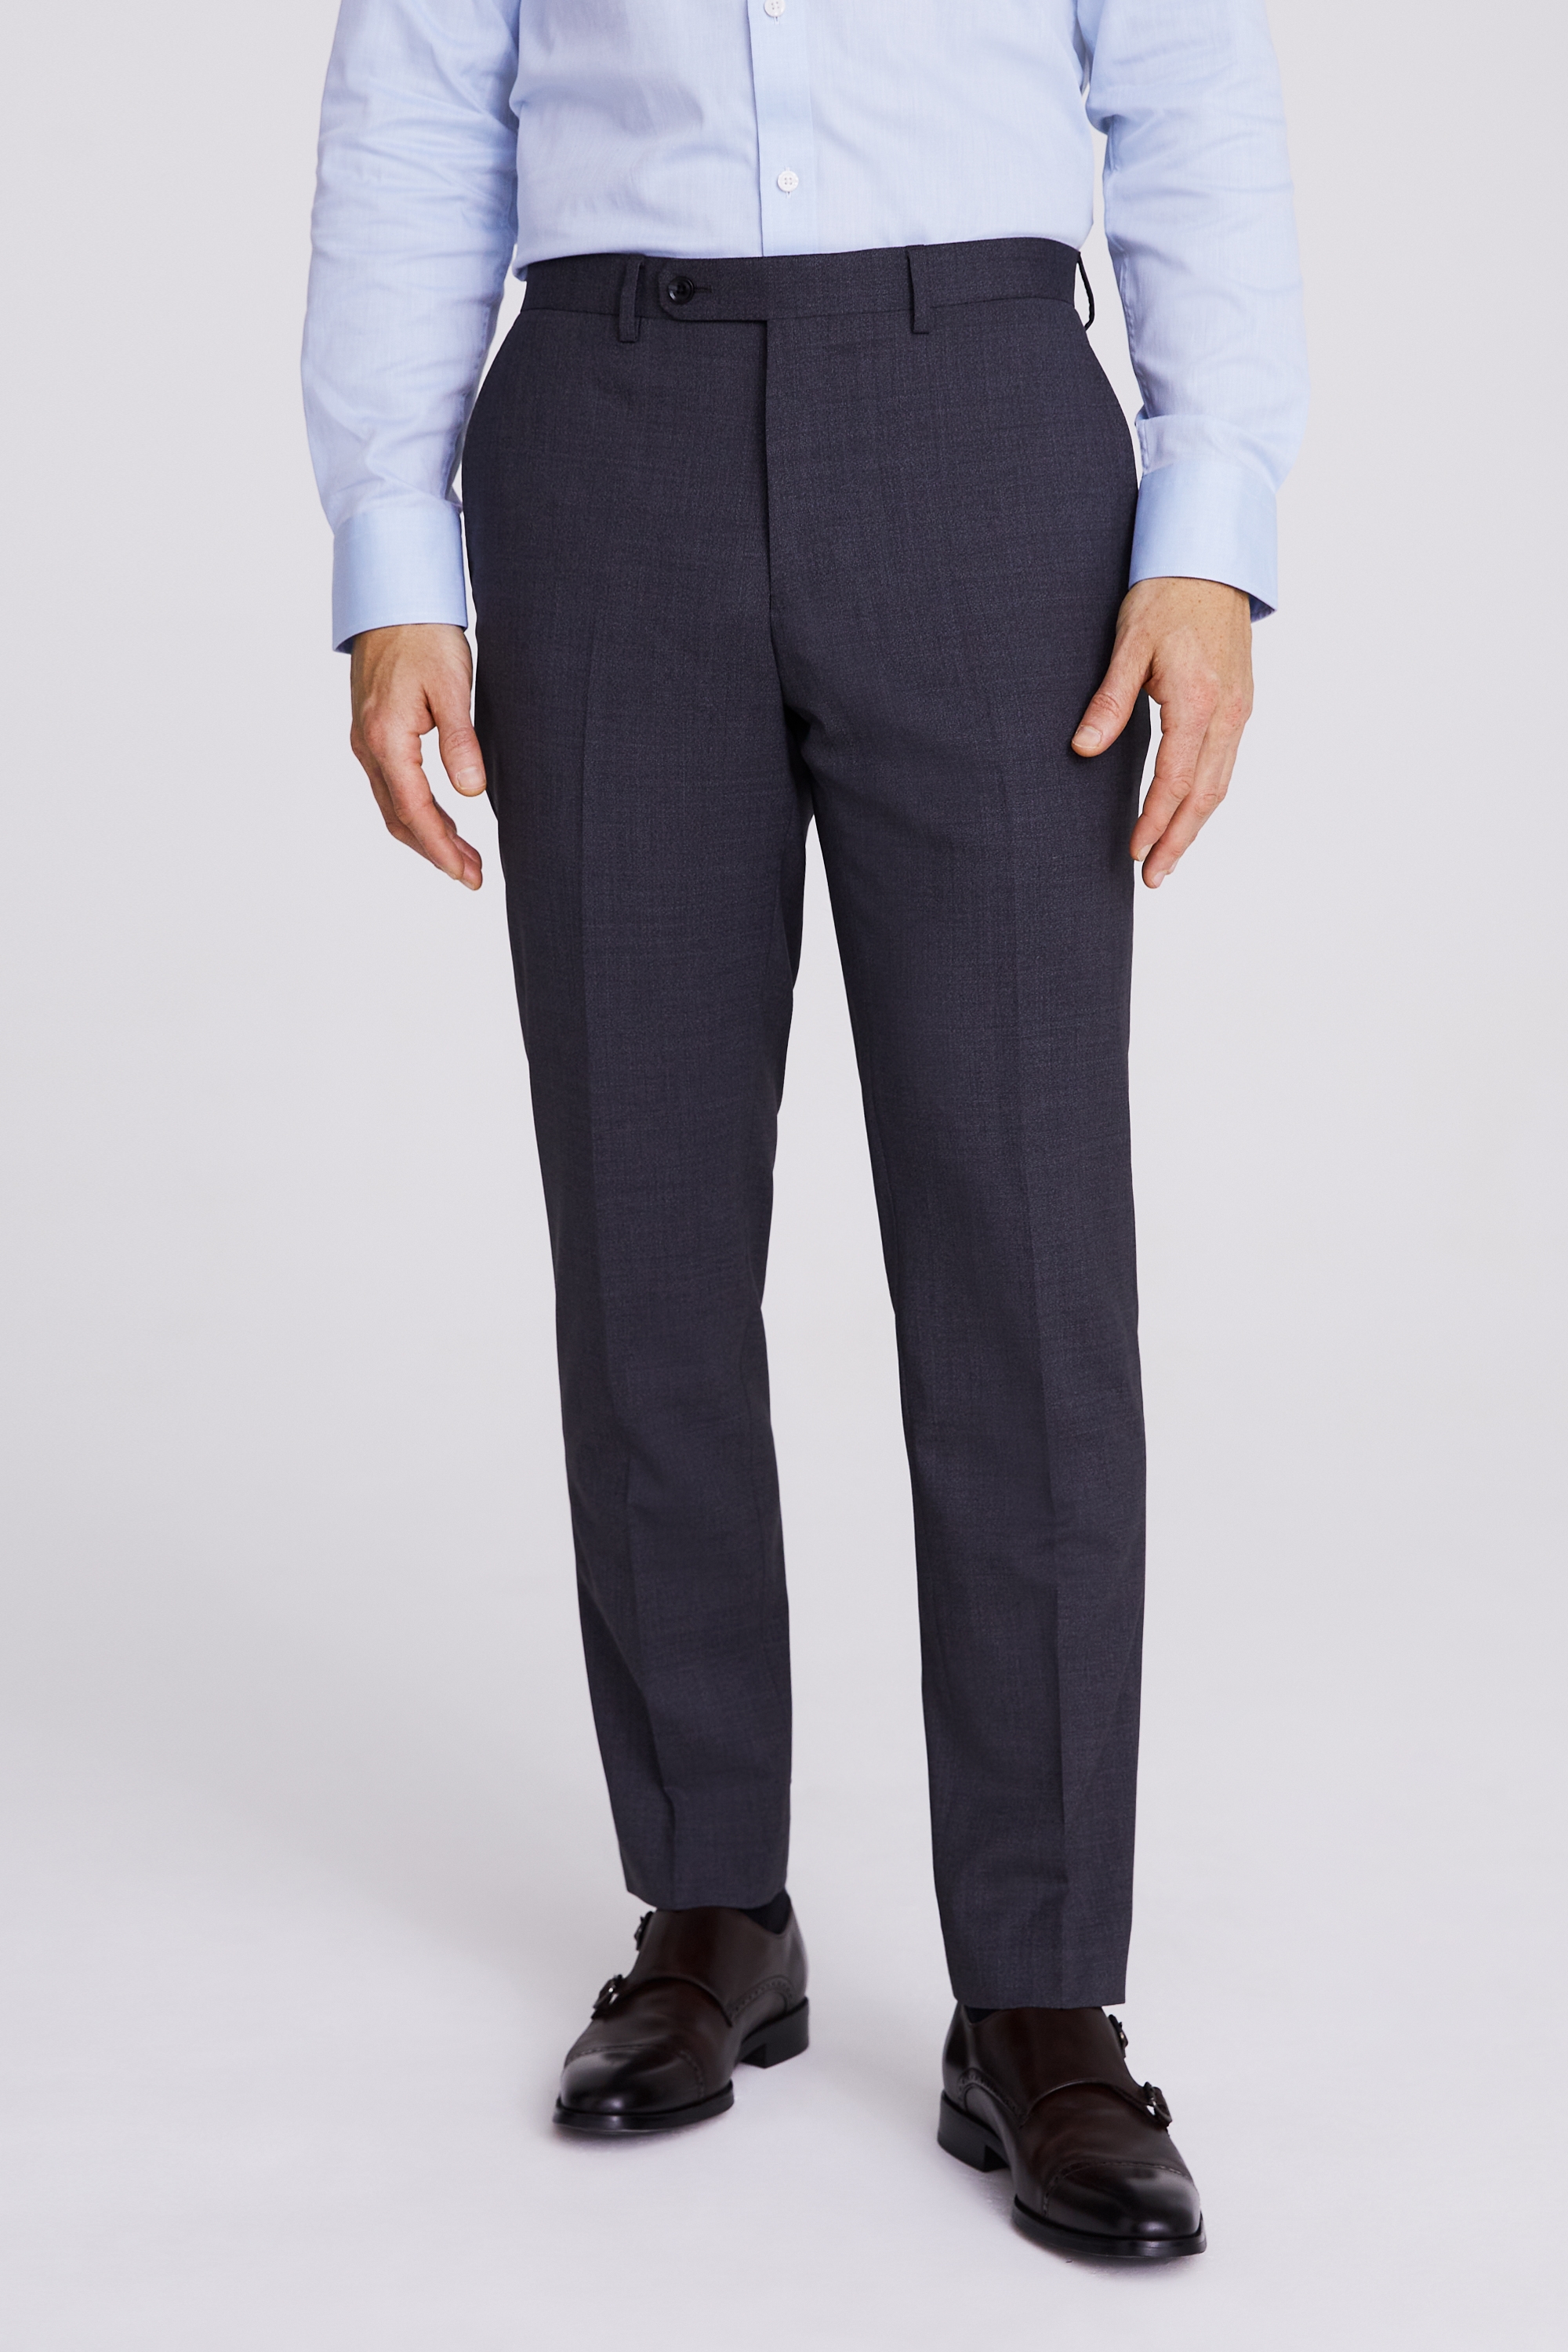 Italian Tailored Fit Grey Trousers | Buy Online at Moss